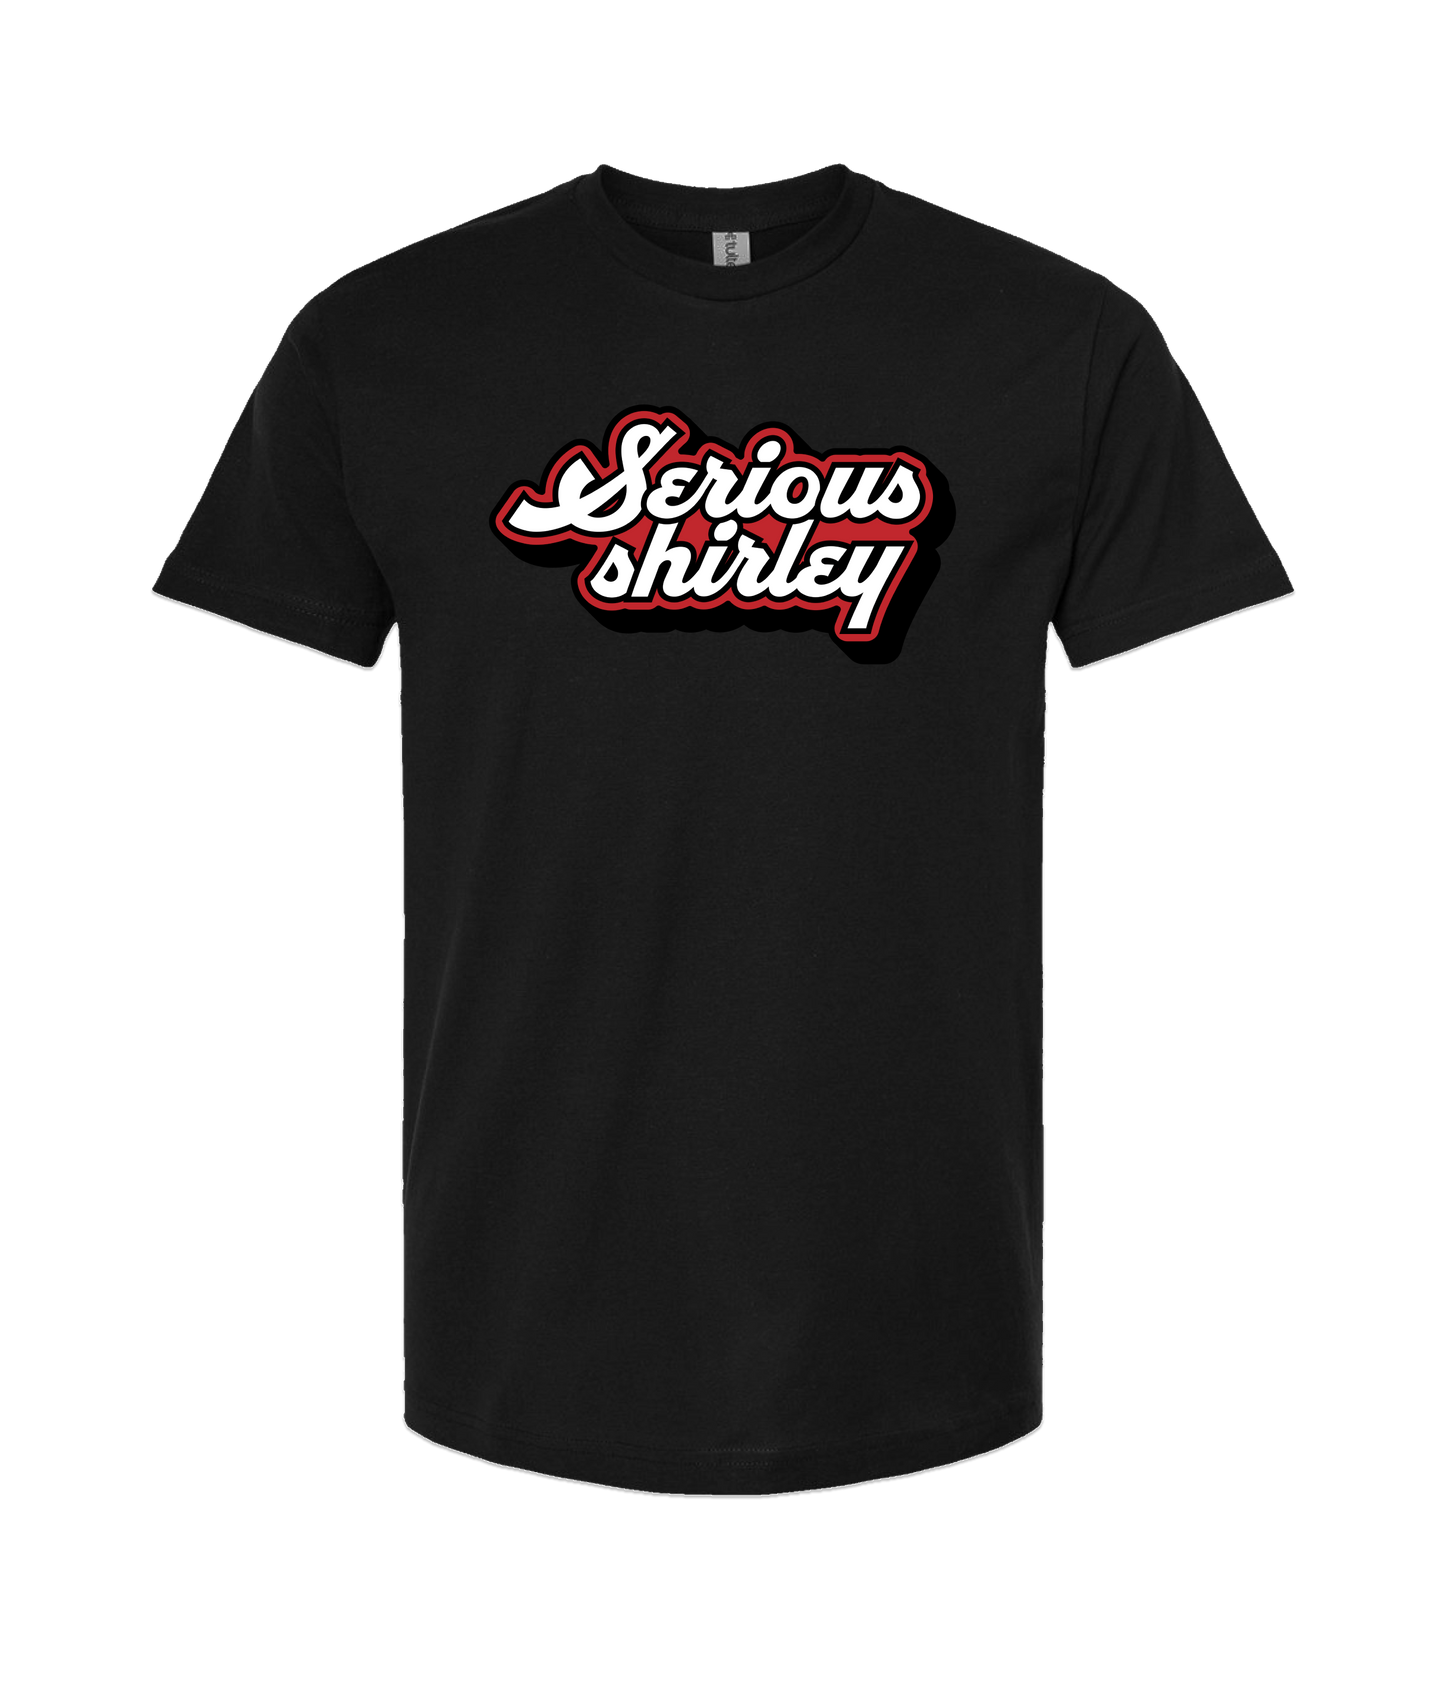 Serious Shirley - Red and White Logo - Black T-Shirt